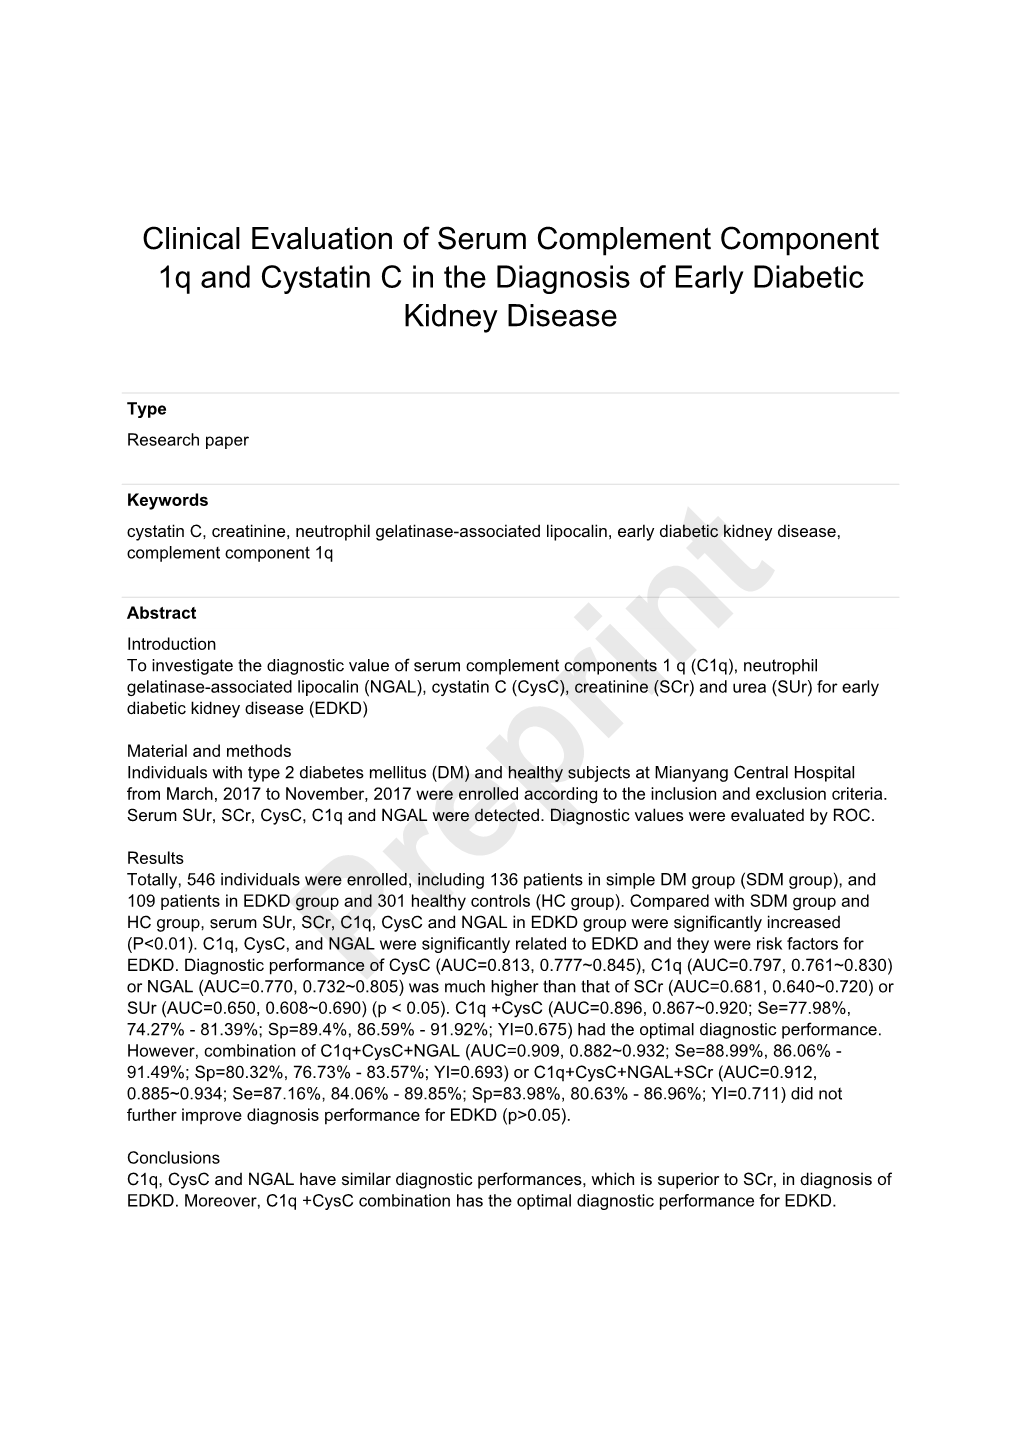 Clinical Evaluation of Serum Complement Component 1Q and Cystatin C in the Diagnosis of Early Diabetic Kidney Disease